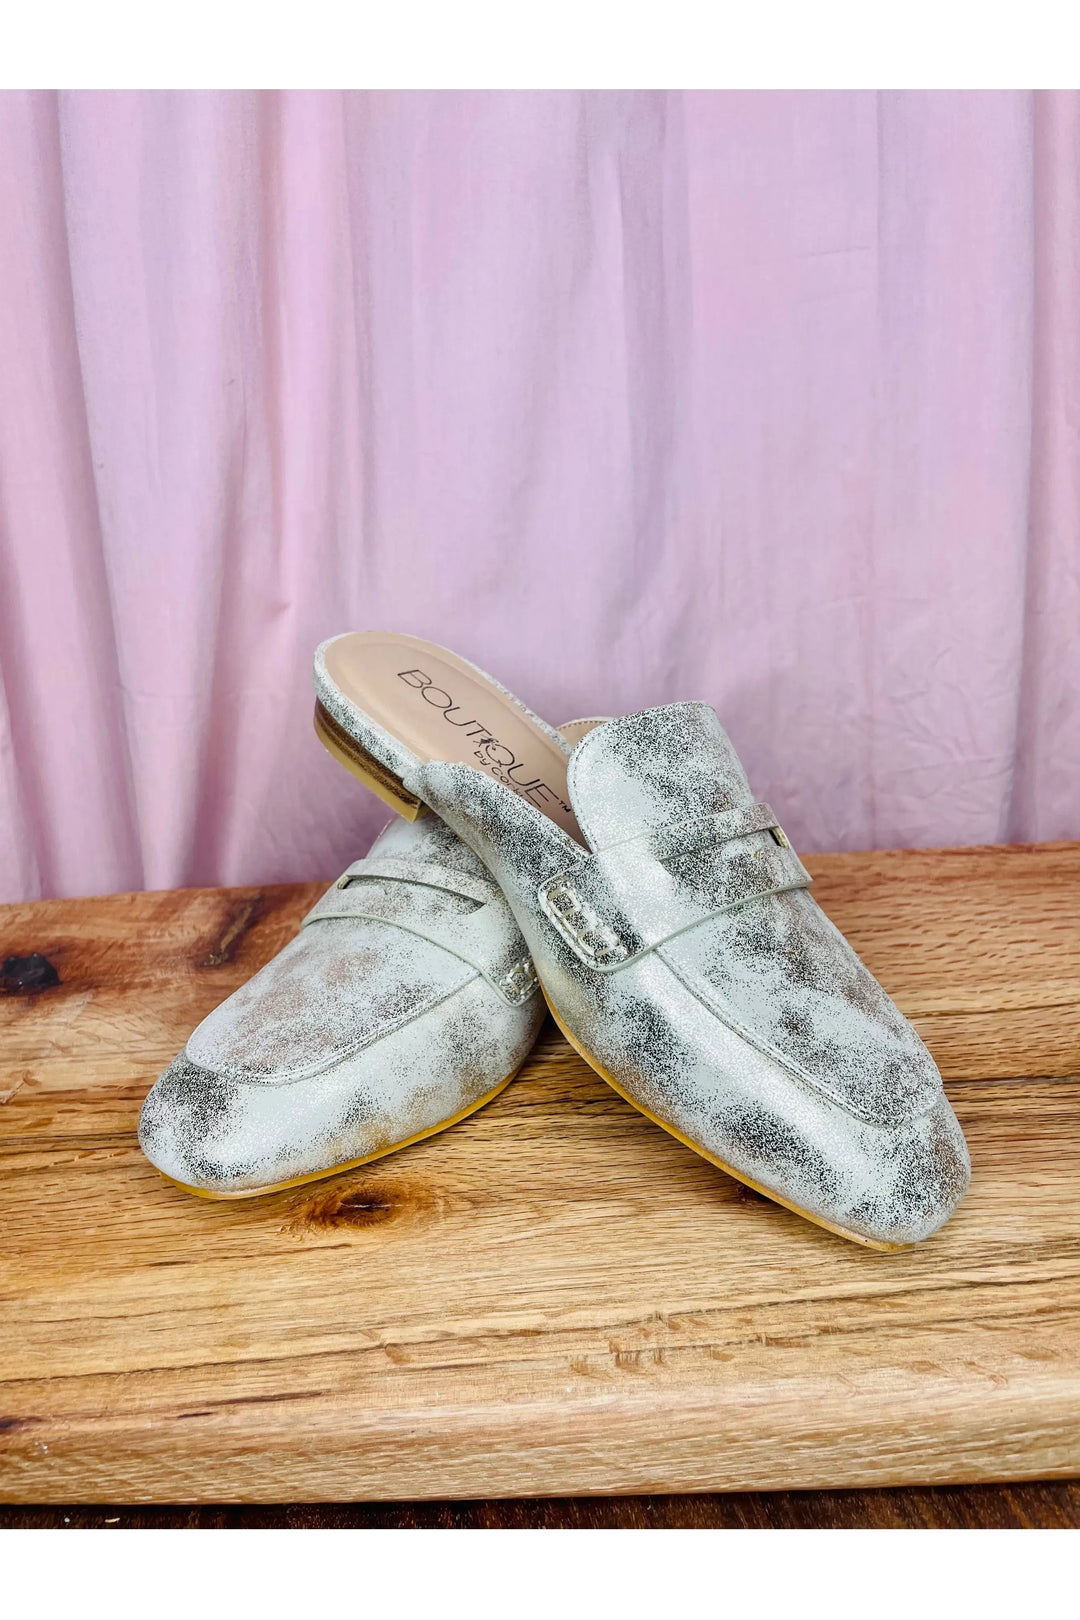 Corky’s It’s Fall Ya’ll Loafers - Vintage Dragonfly Boutique